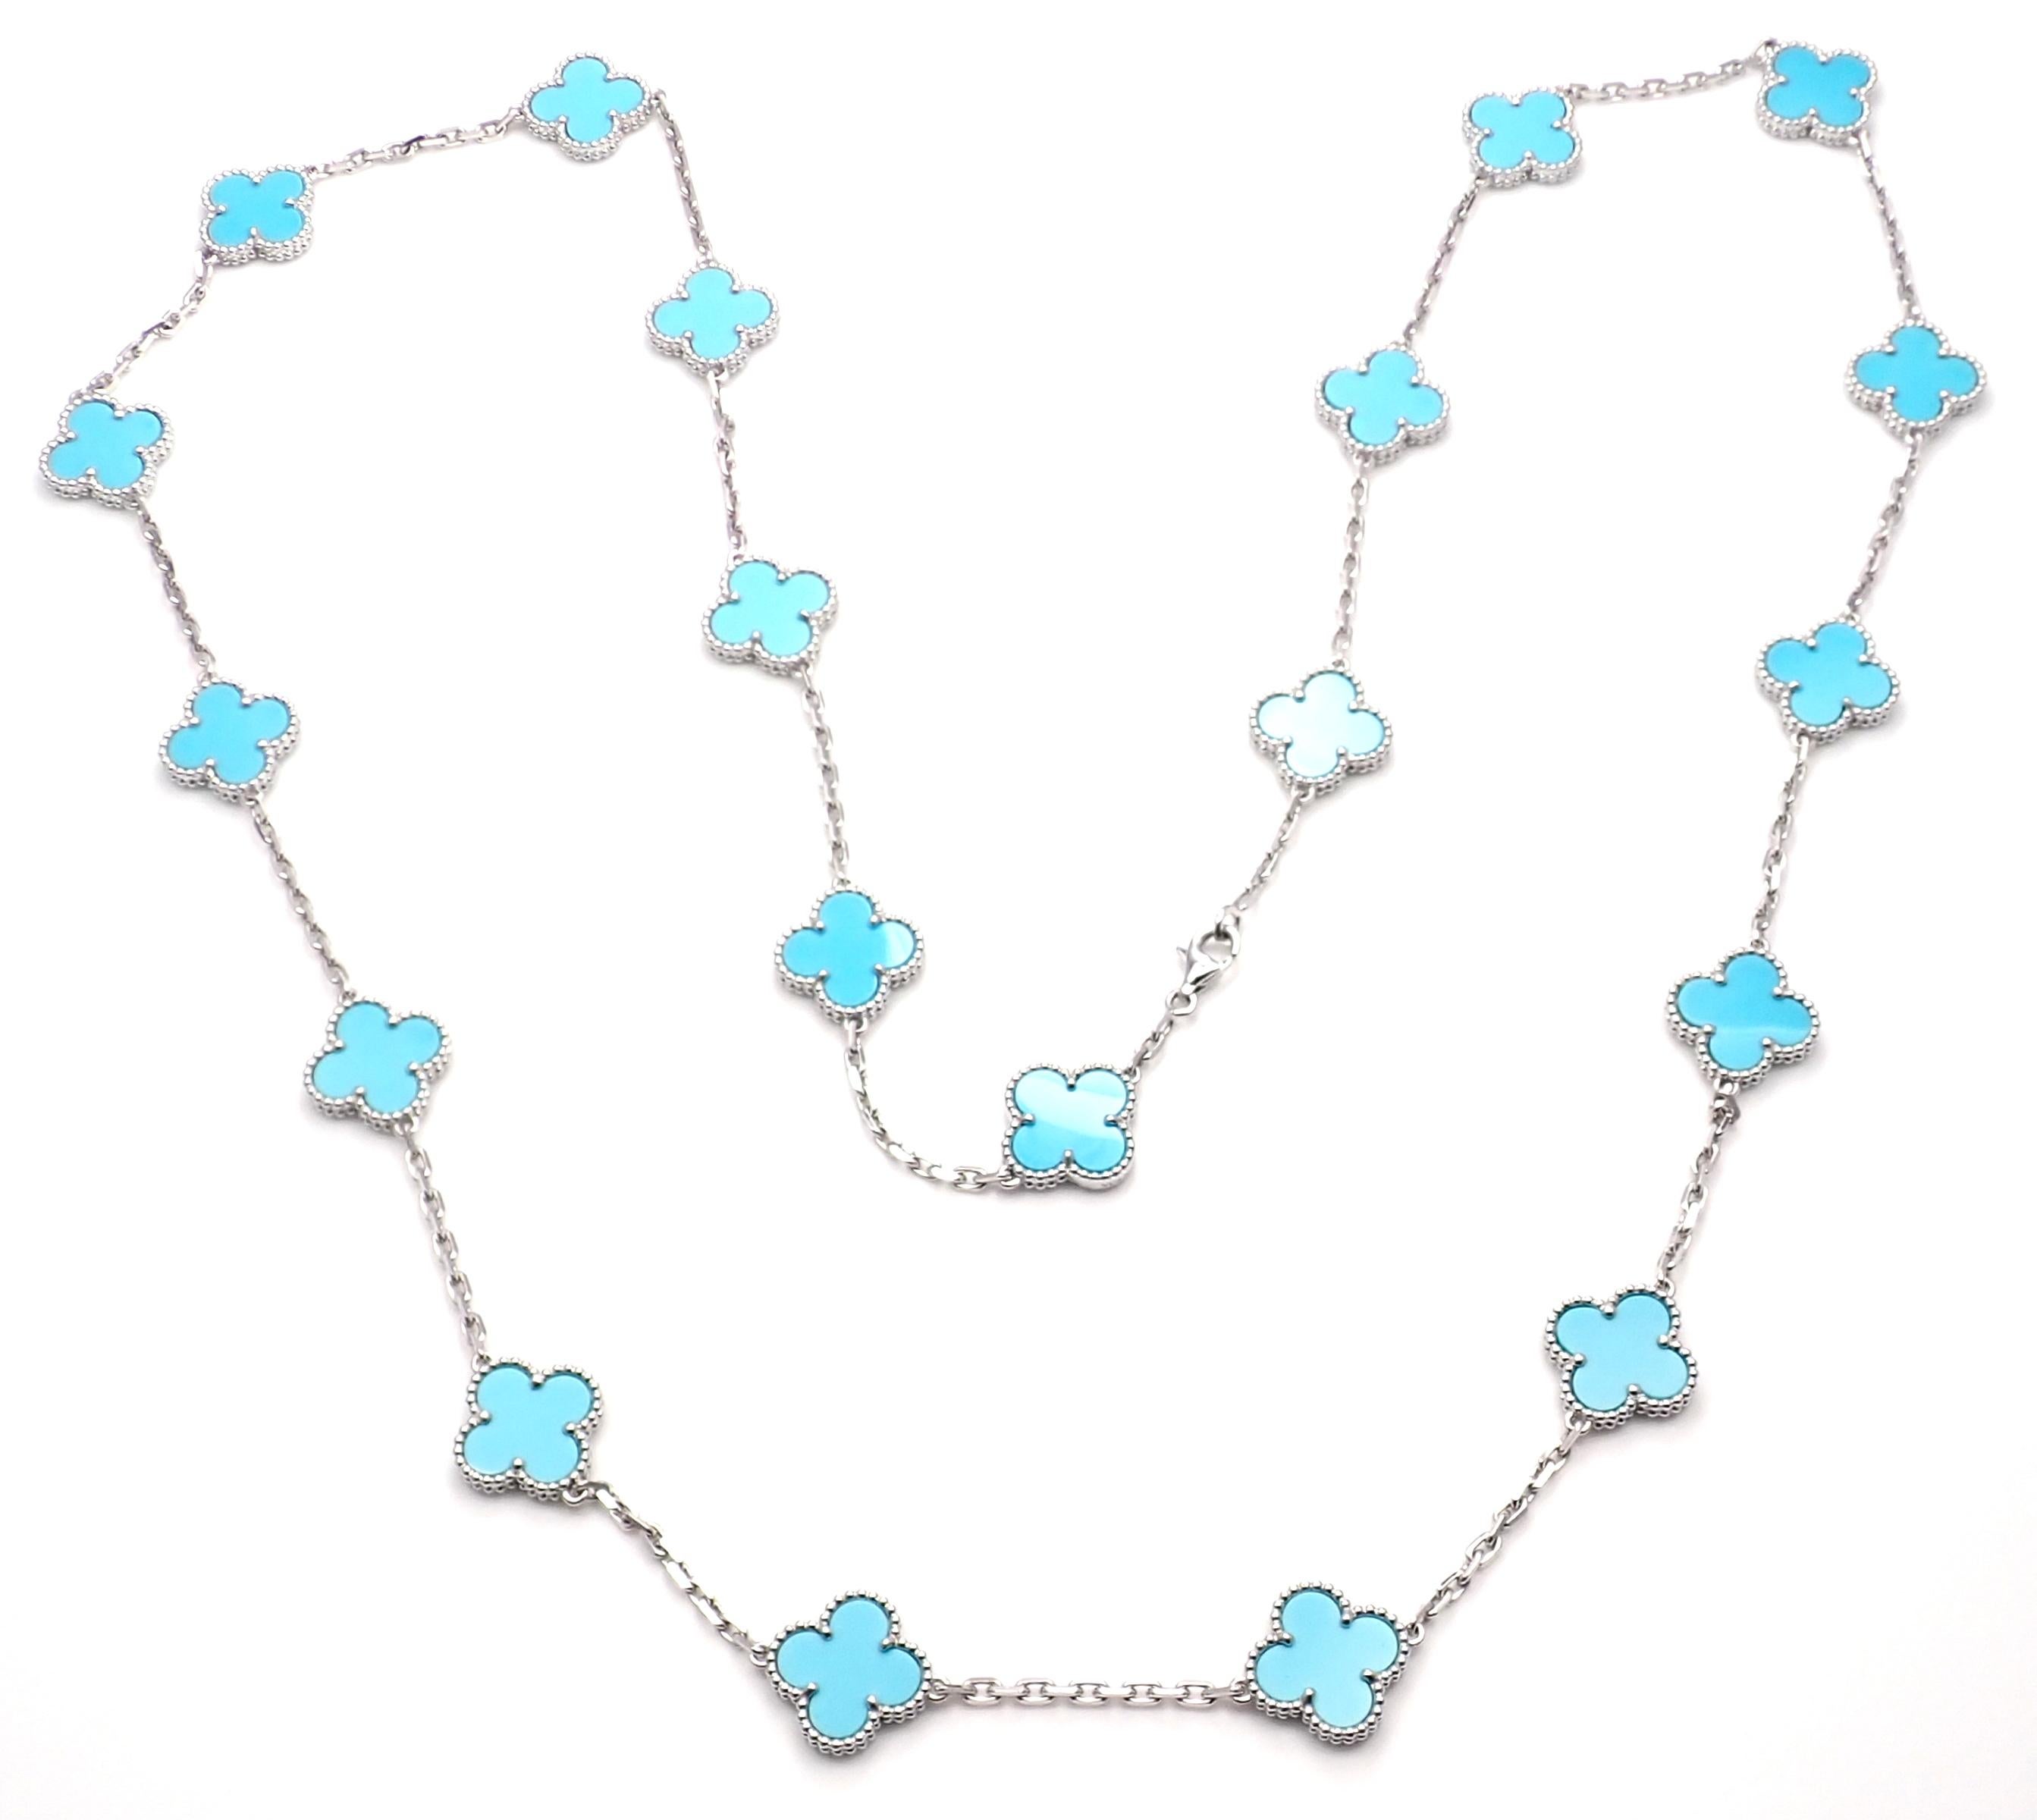 18k White Gold Alhambra 20 Motifs Turquoise Necklace by Van Cleef & Arpels. 
This necklace comes with Van Cleef & Arpels a certificate, sales receipt and a box.
With 20 motifs of turquoise alhambra stones 15mm each
Details: 
Length: 33.5''
Width: